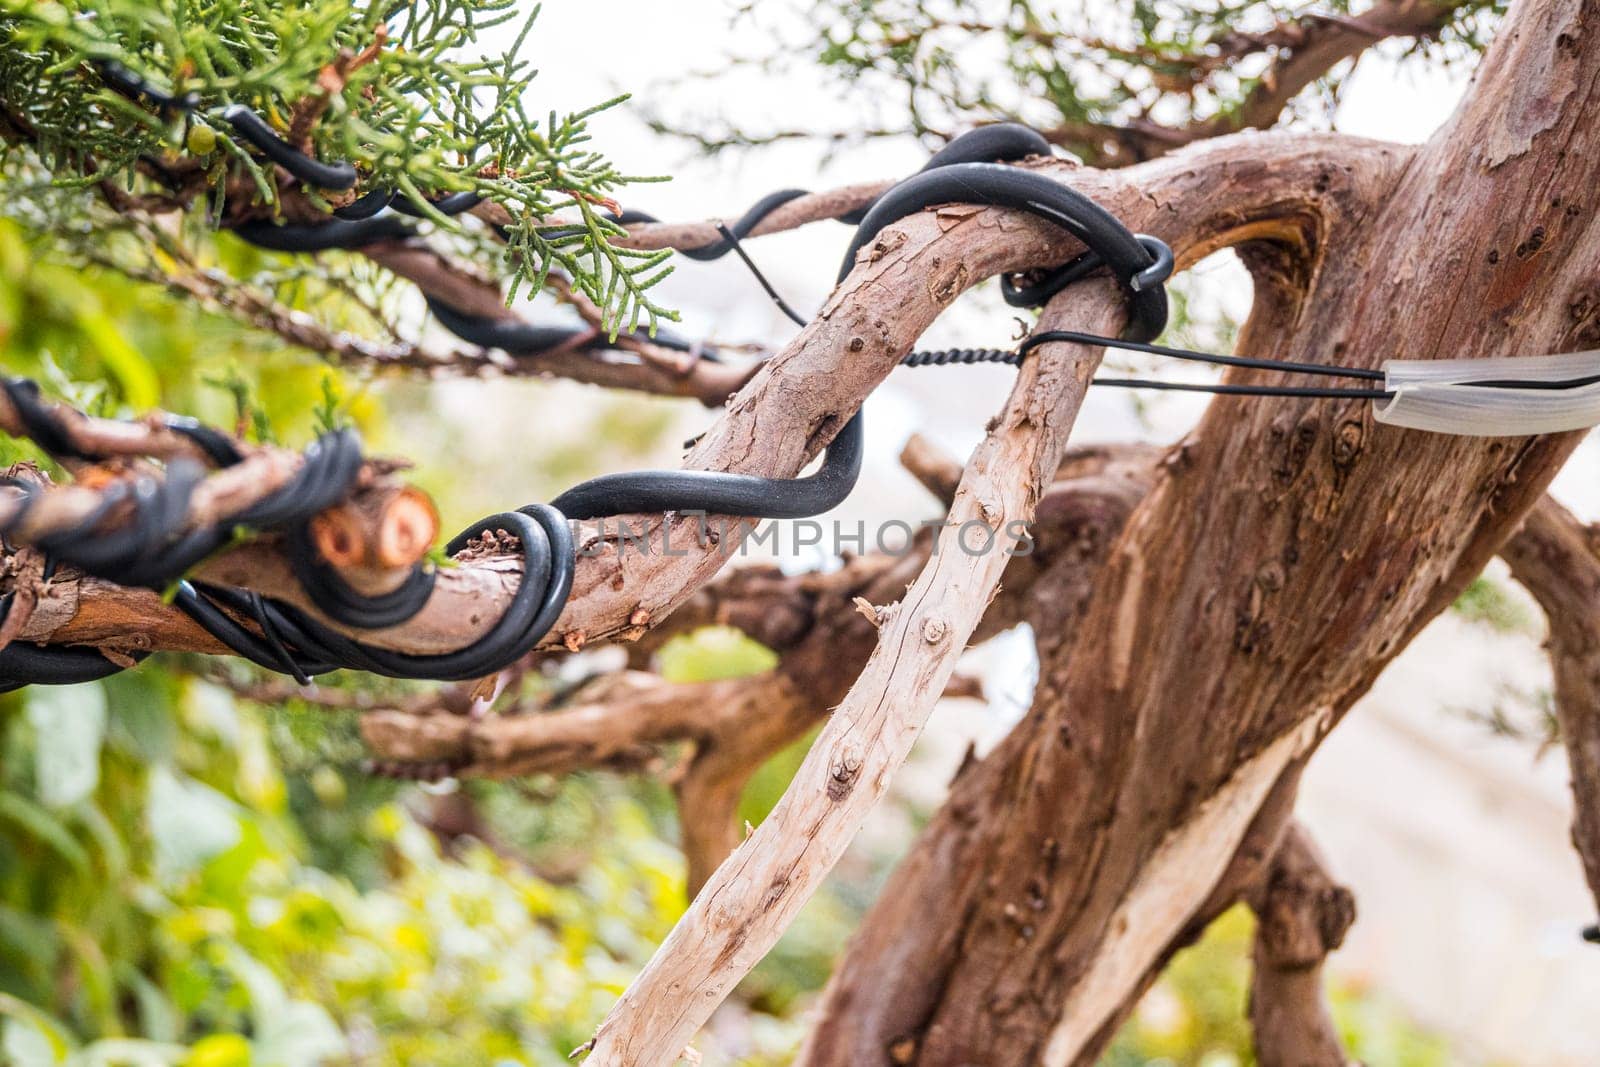 Guiding the branch of a bonsai with copper wire to simulate a tree